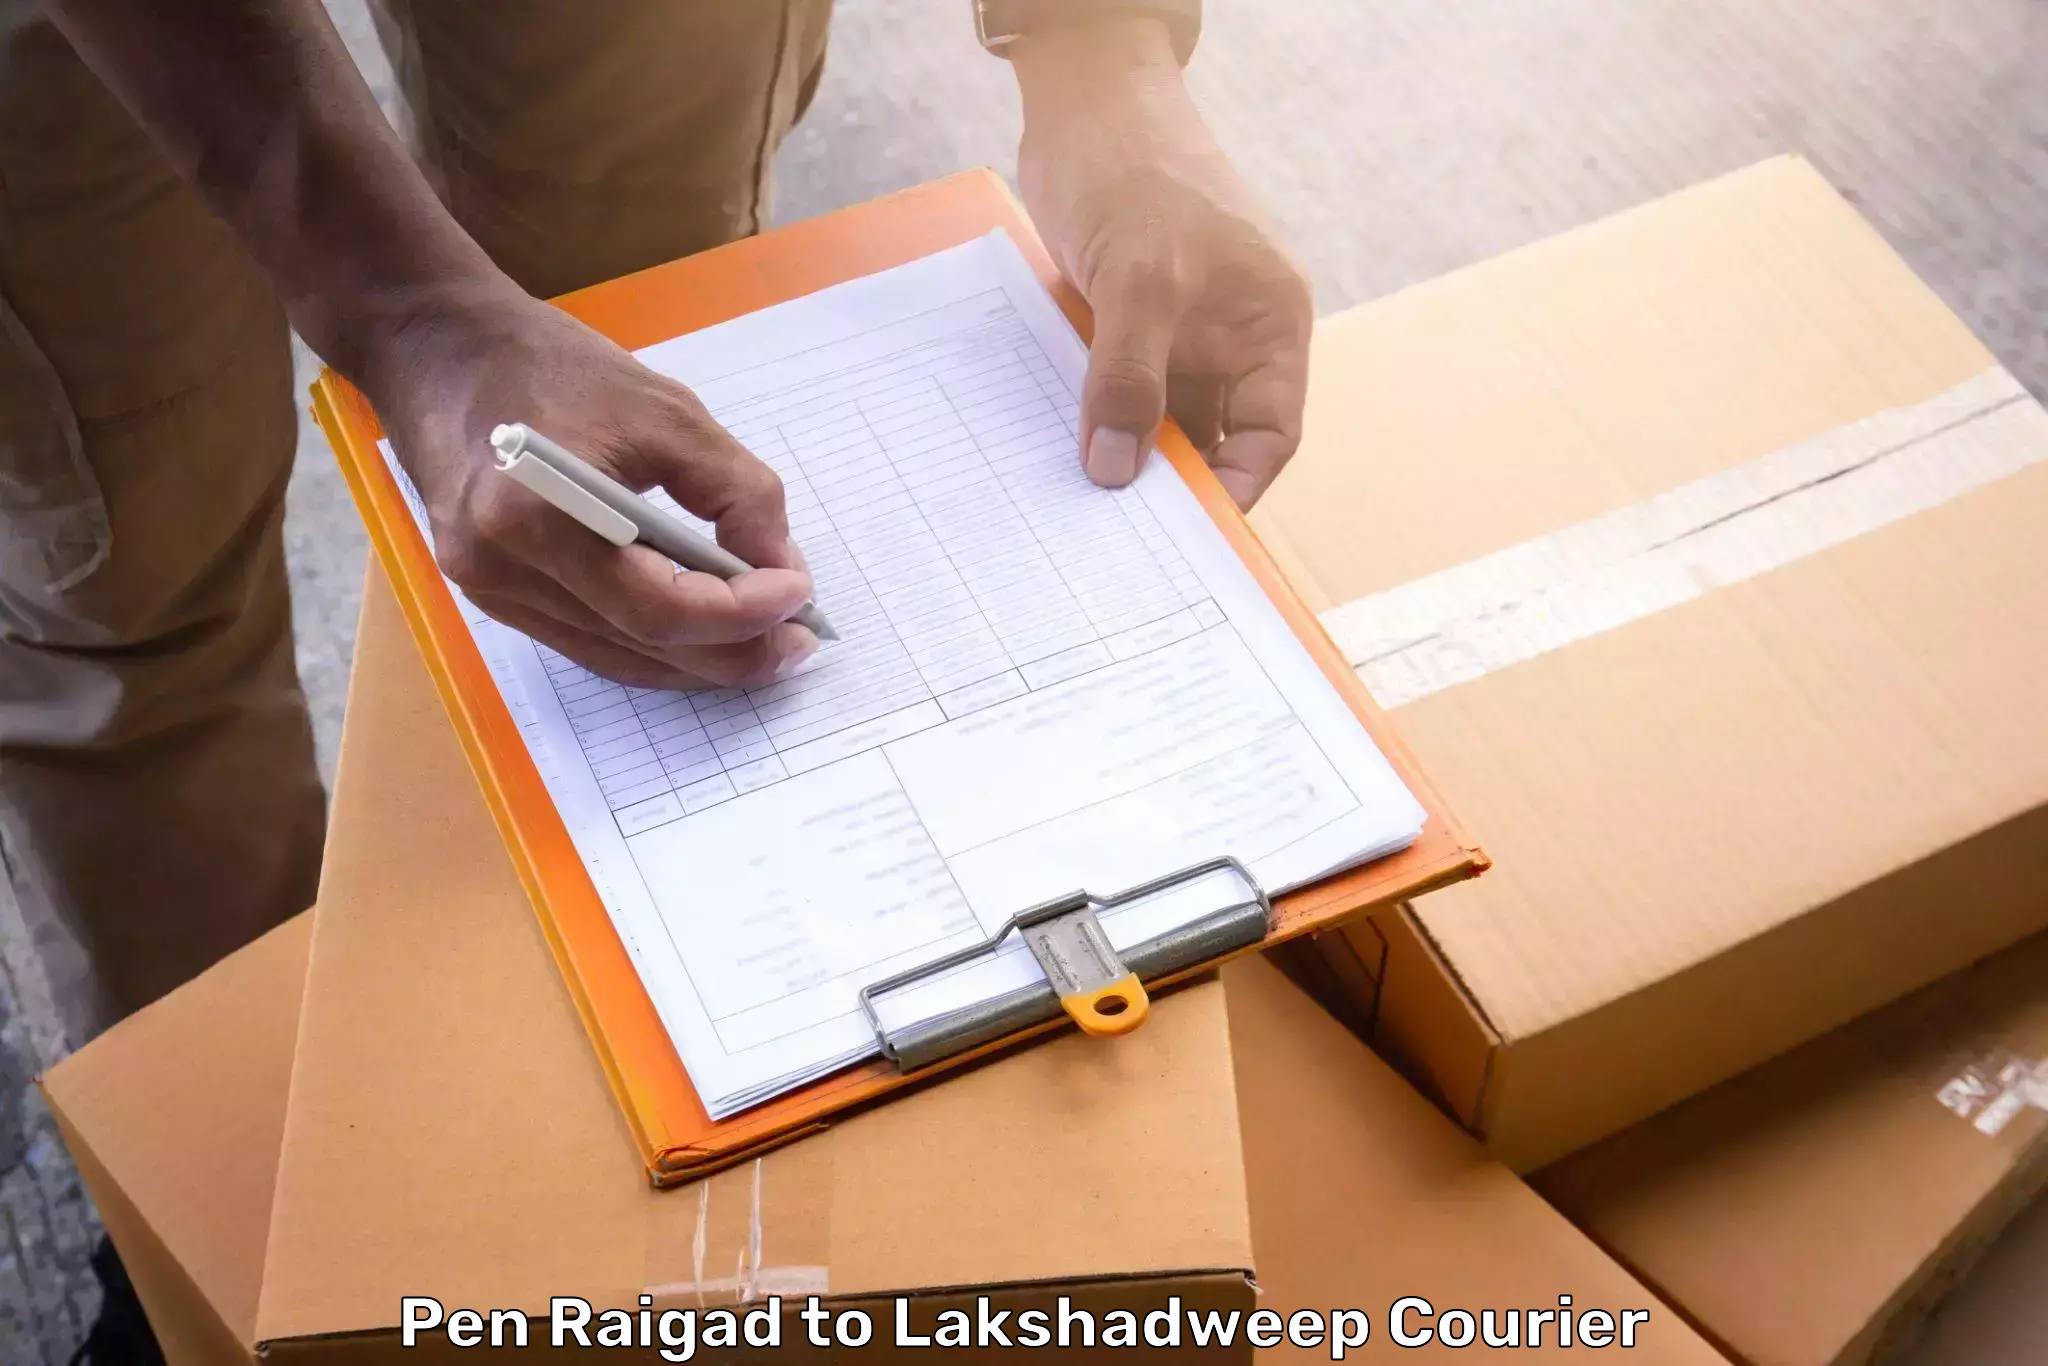 Baggage delivery planning in Pen Raigad to Lakshadweep